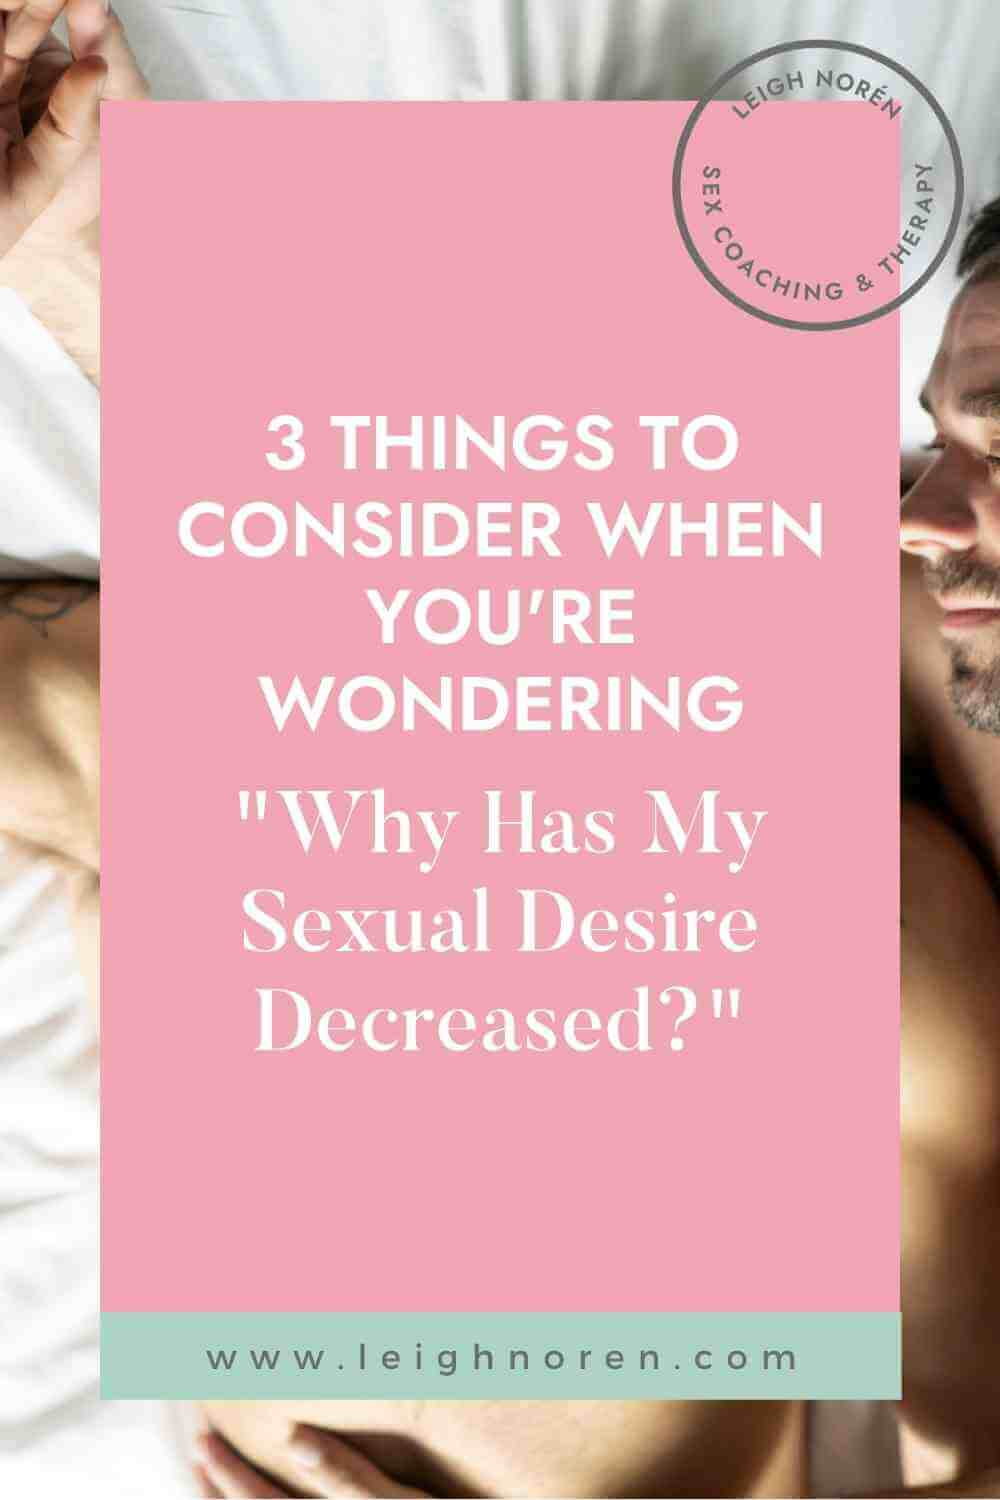 3 Things To Consider When You're Wondering "Why Has My Sexual Desire Decreased?"